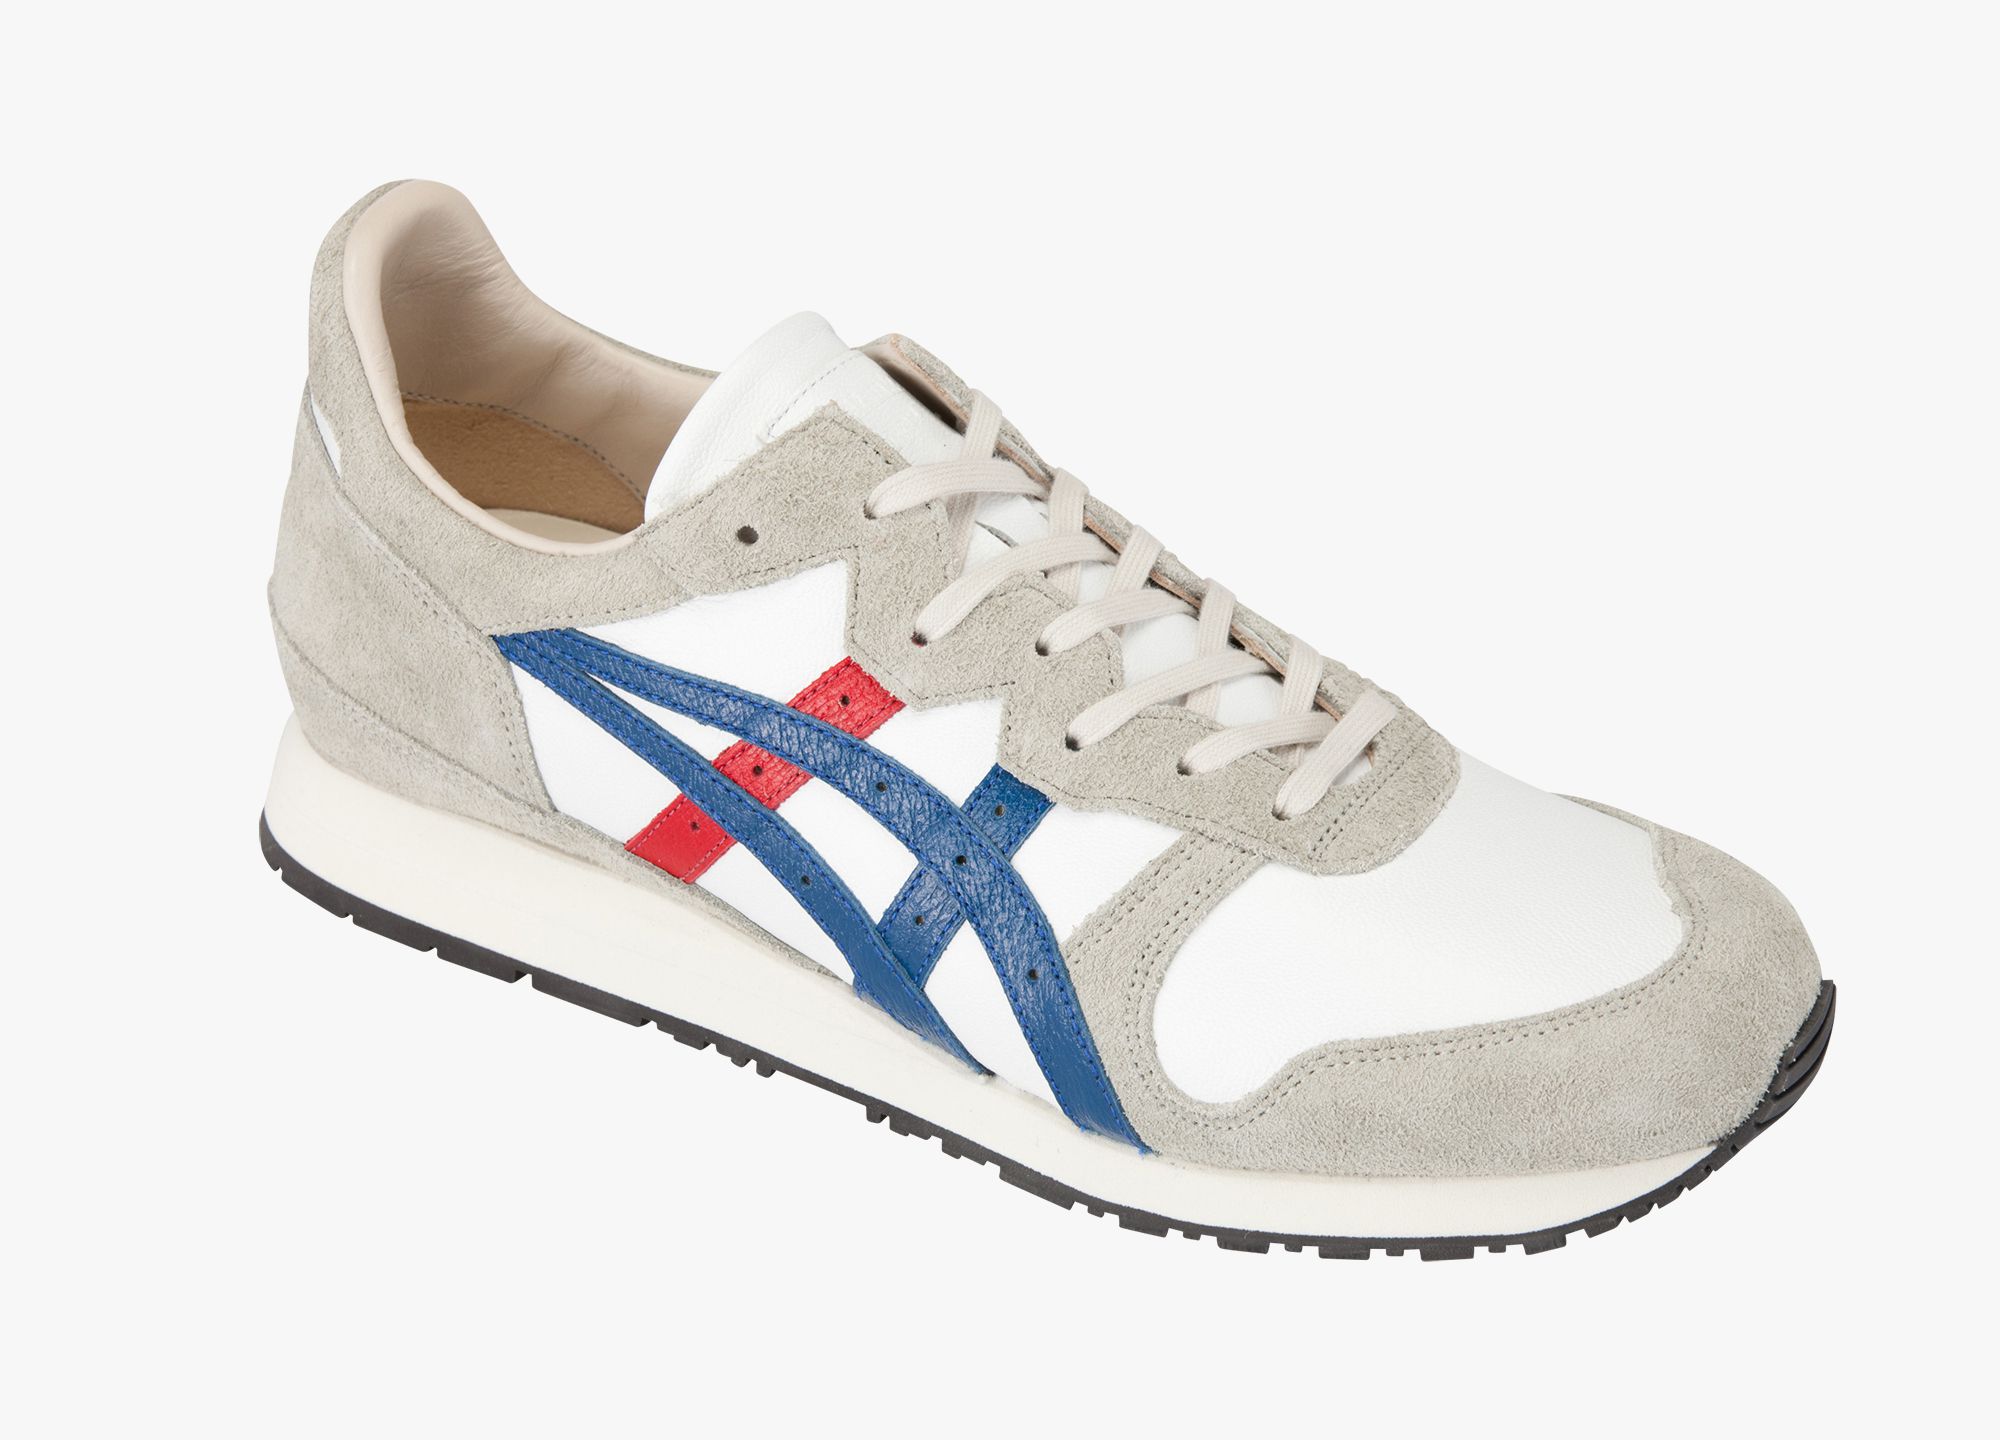 New Models have arrived from the Onitsuka Tiger's “NIPPON MADE